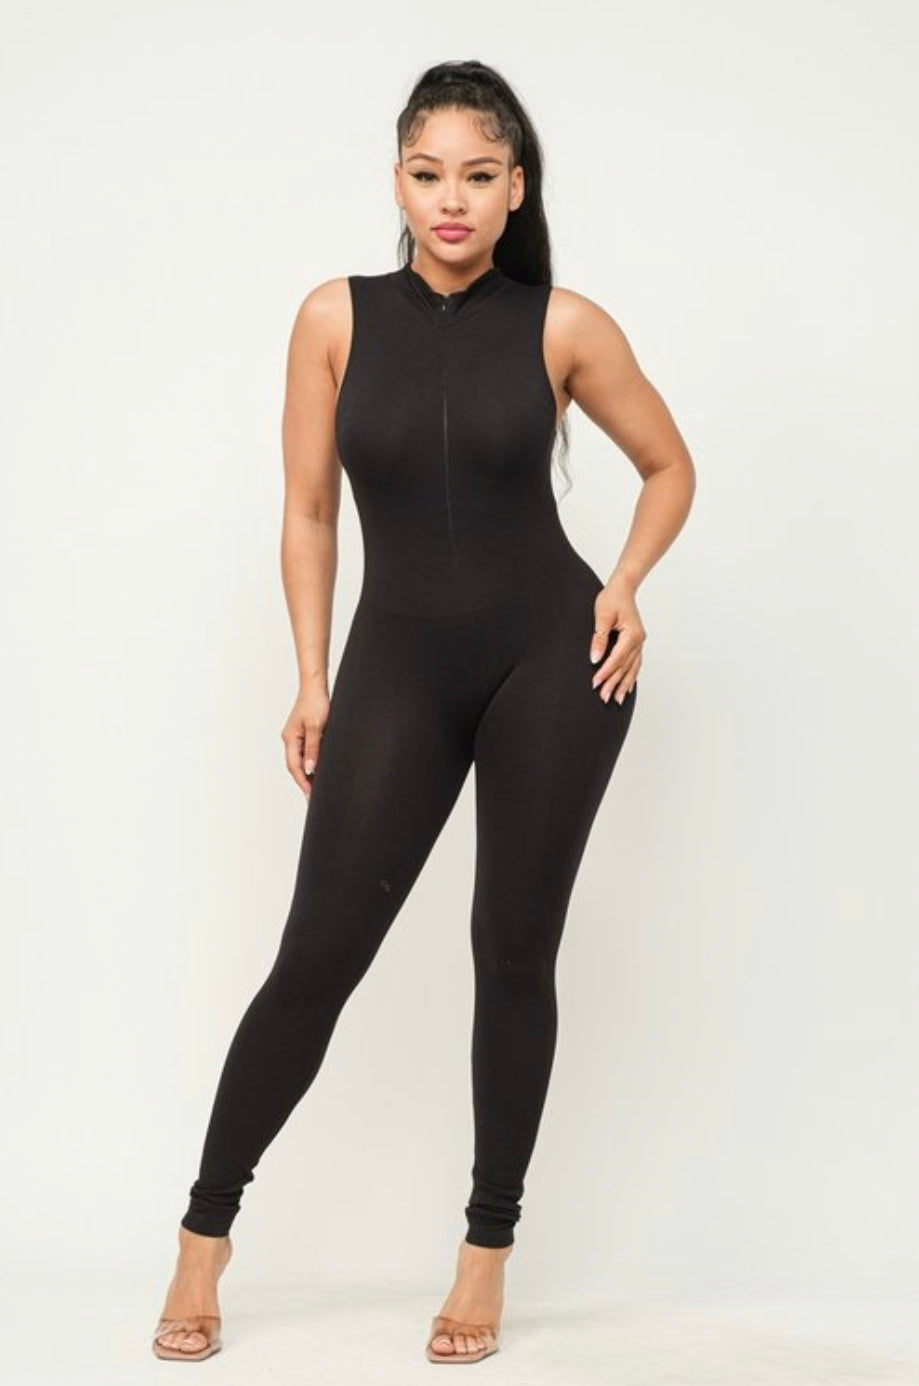 Fly Girl Catsuit